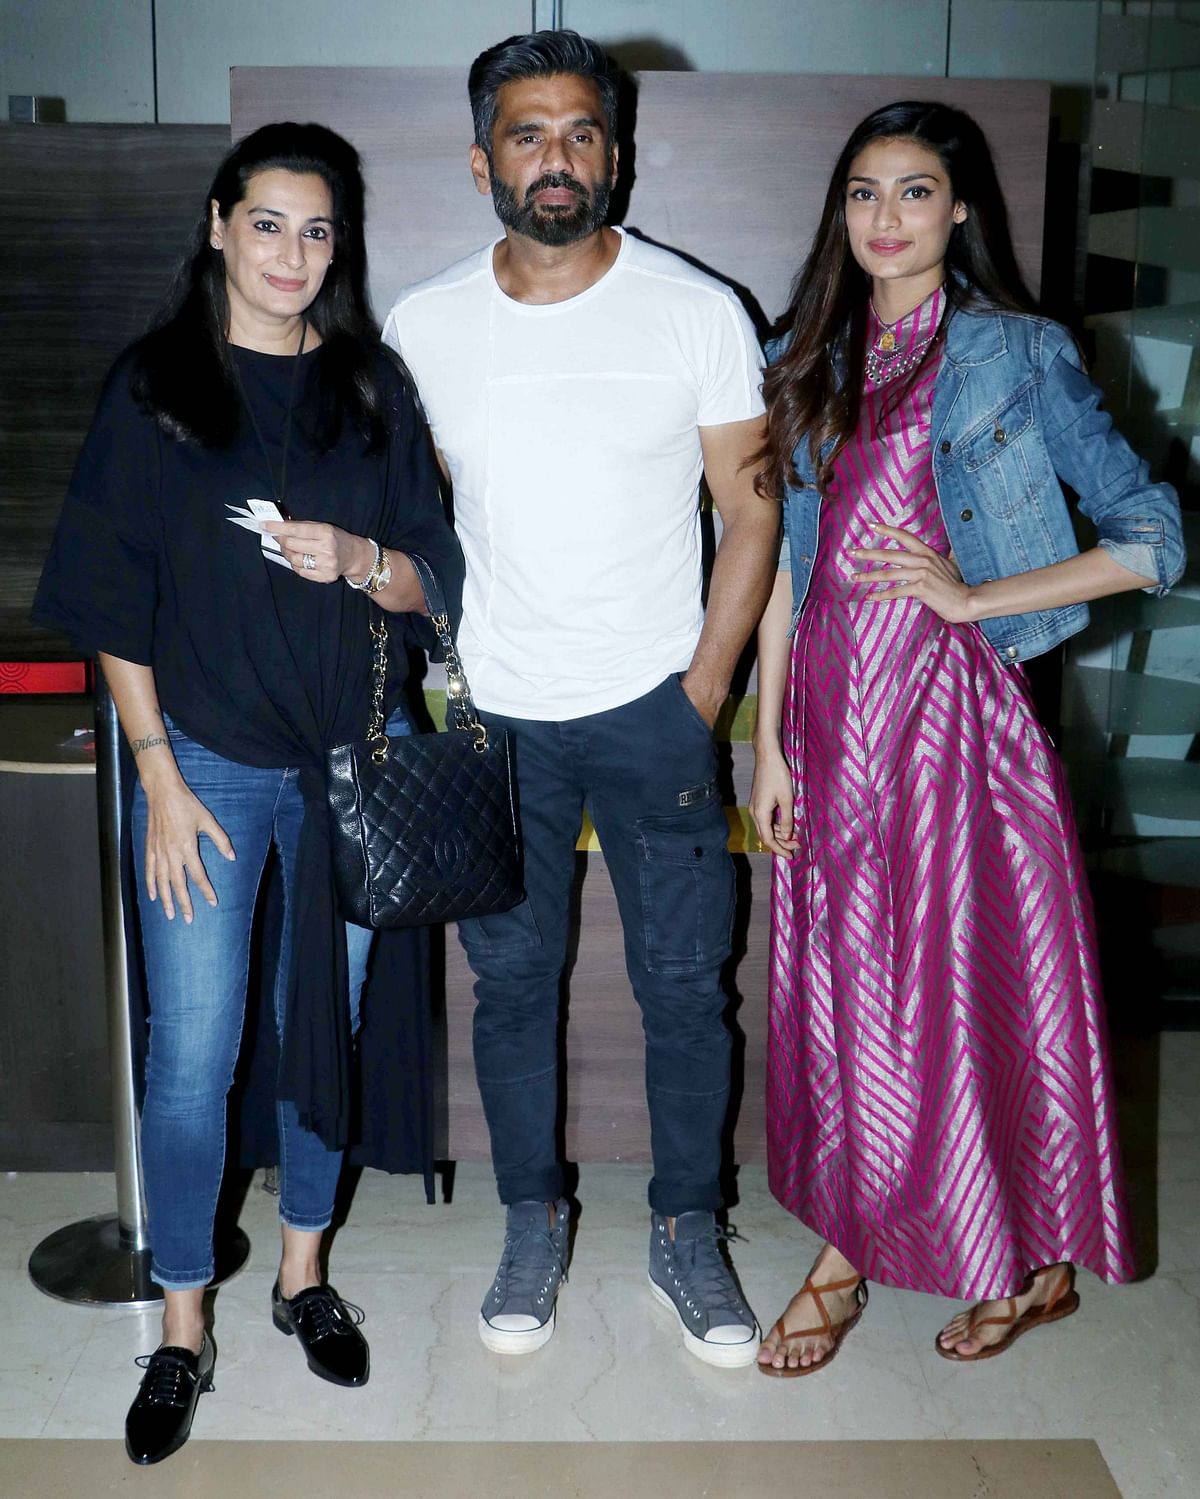 Celebs trooped in to show their love for the Kabir Khan film.